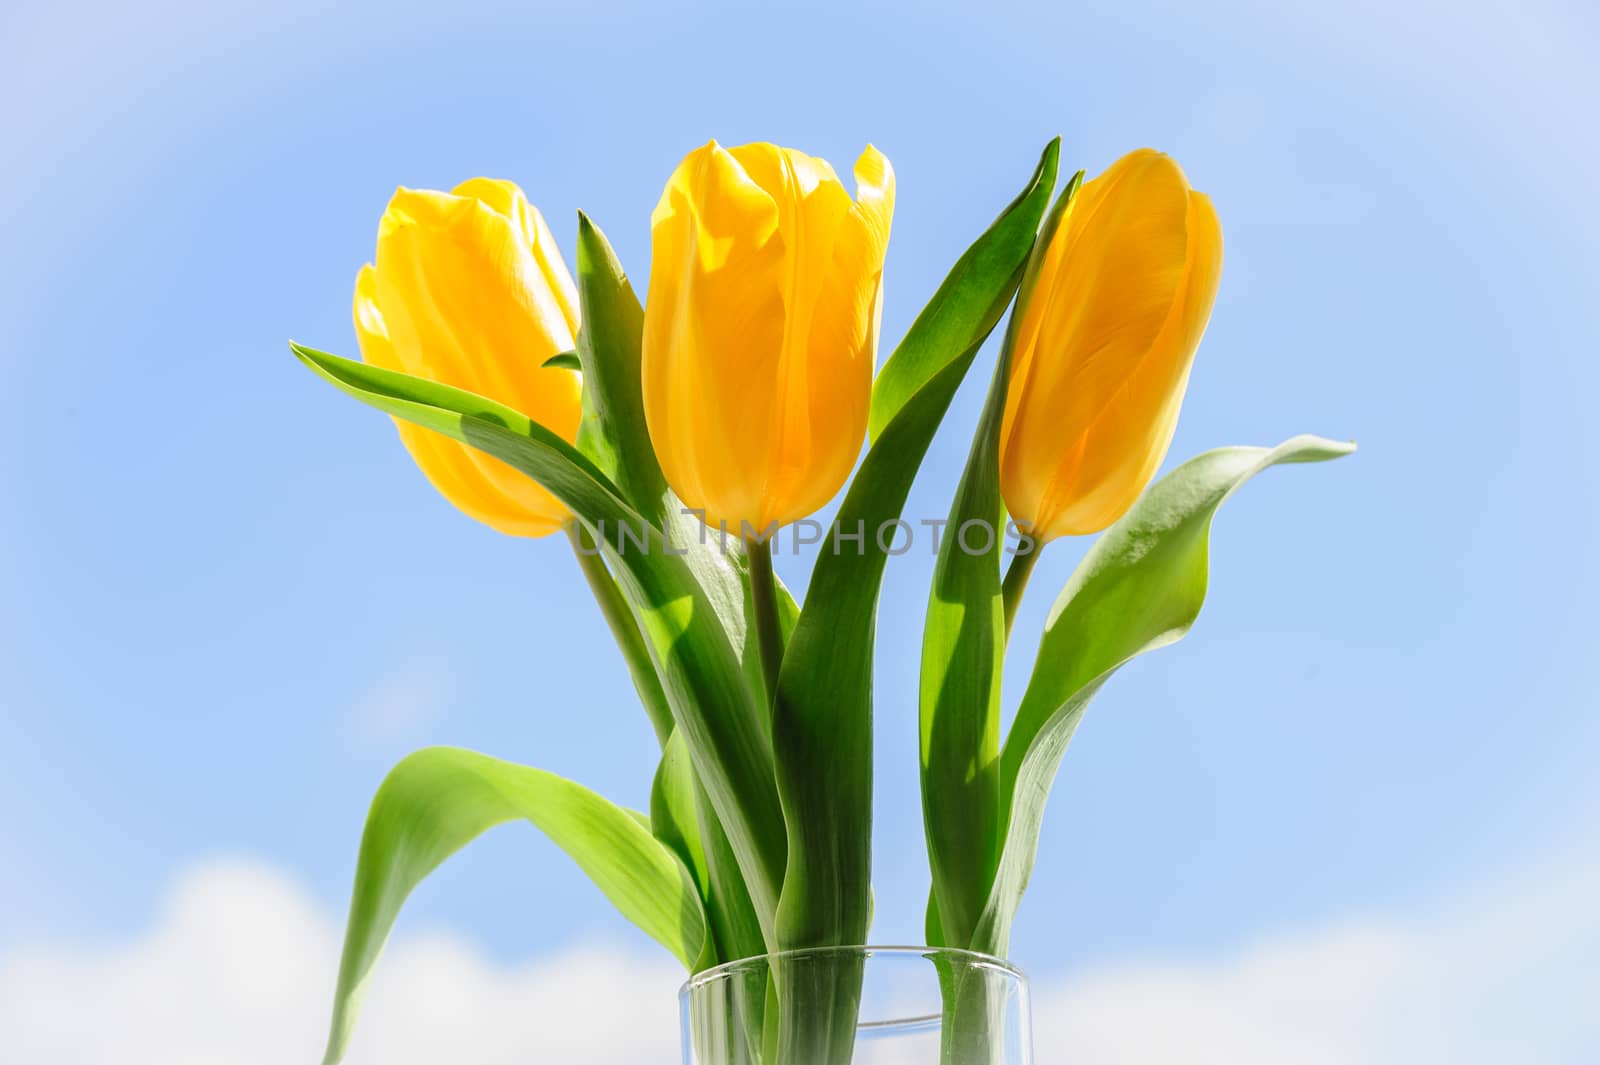 yellow tulips in vase on window sill by starush